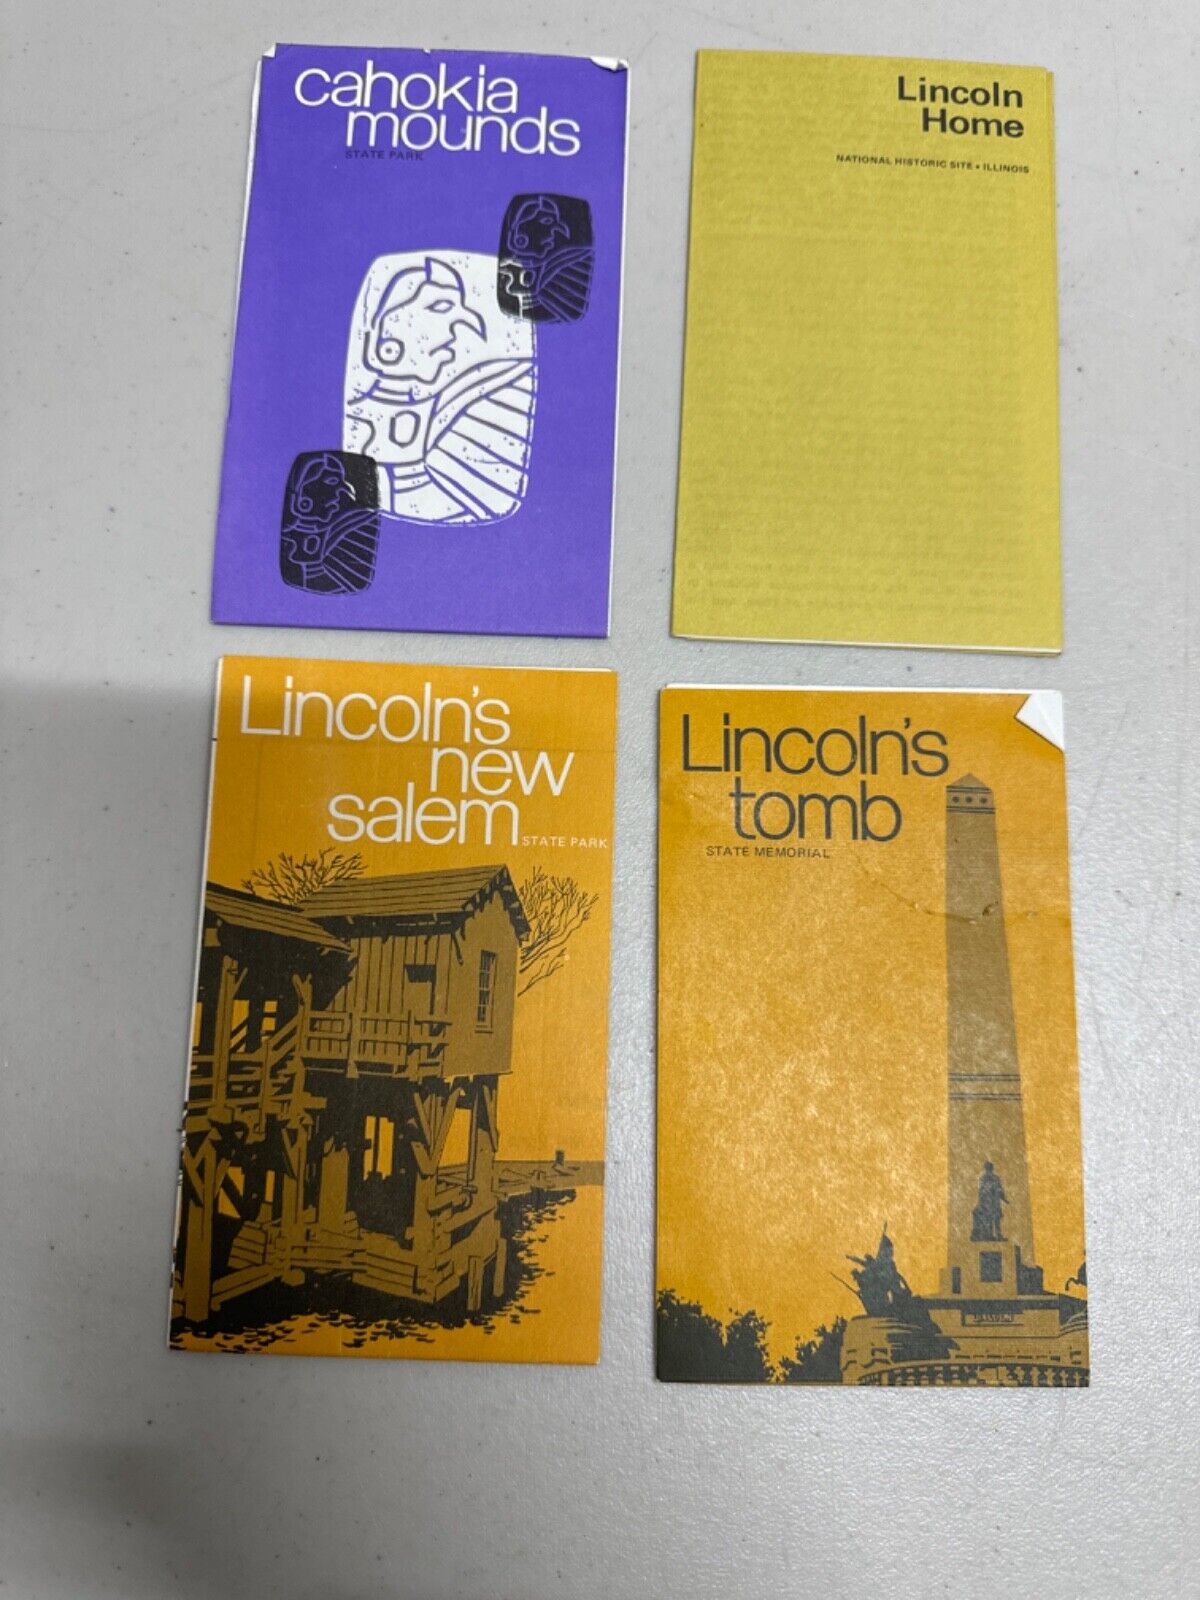 Lincolns Home, Lincolns Tomb, Lincolns New Salem and Cahokia Mounds Brochures